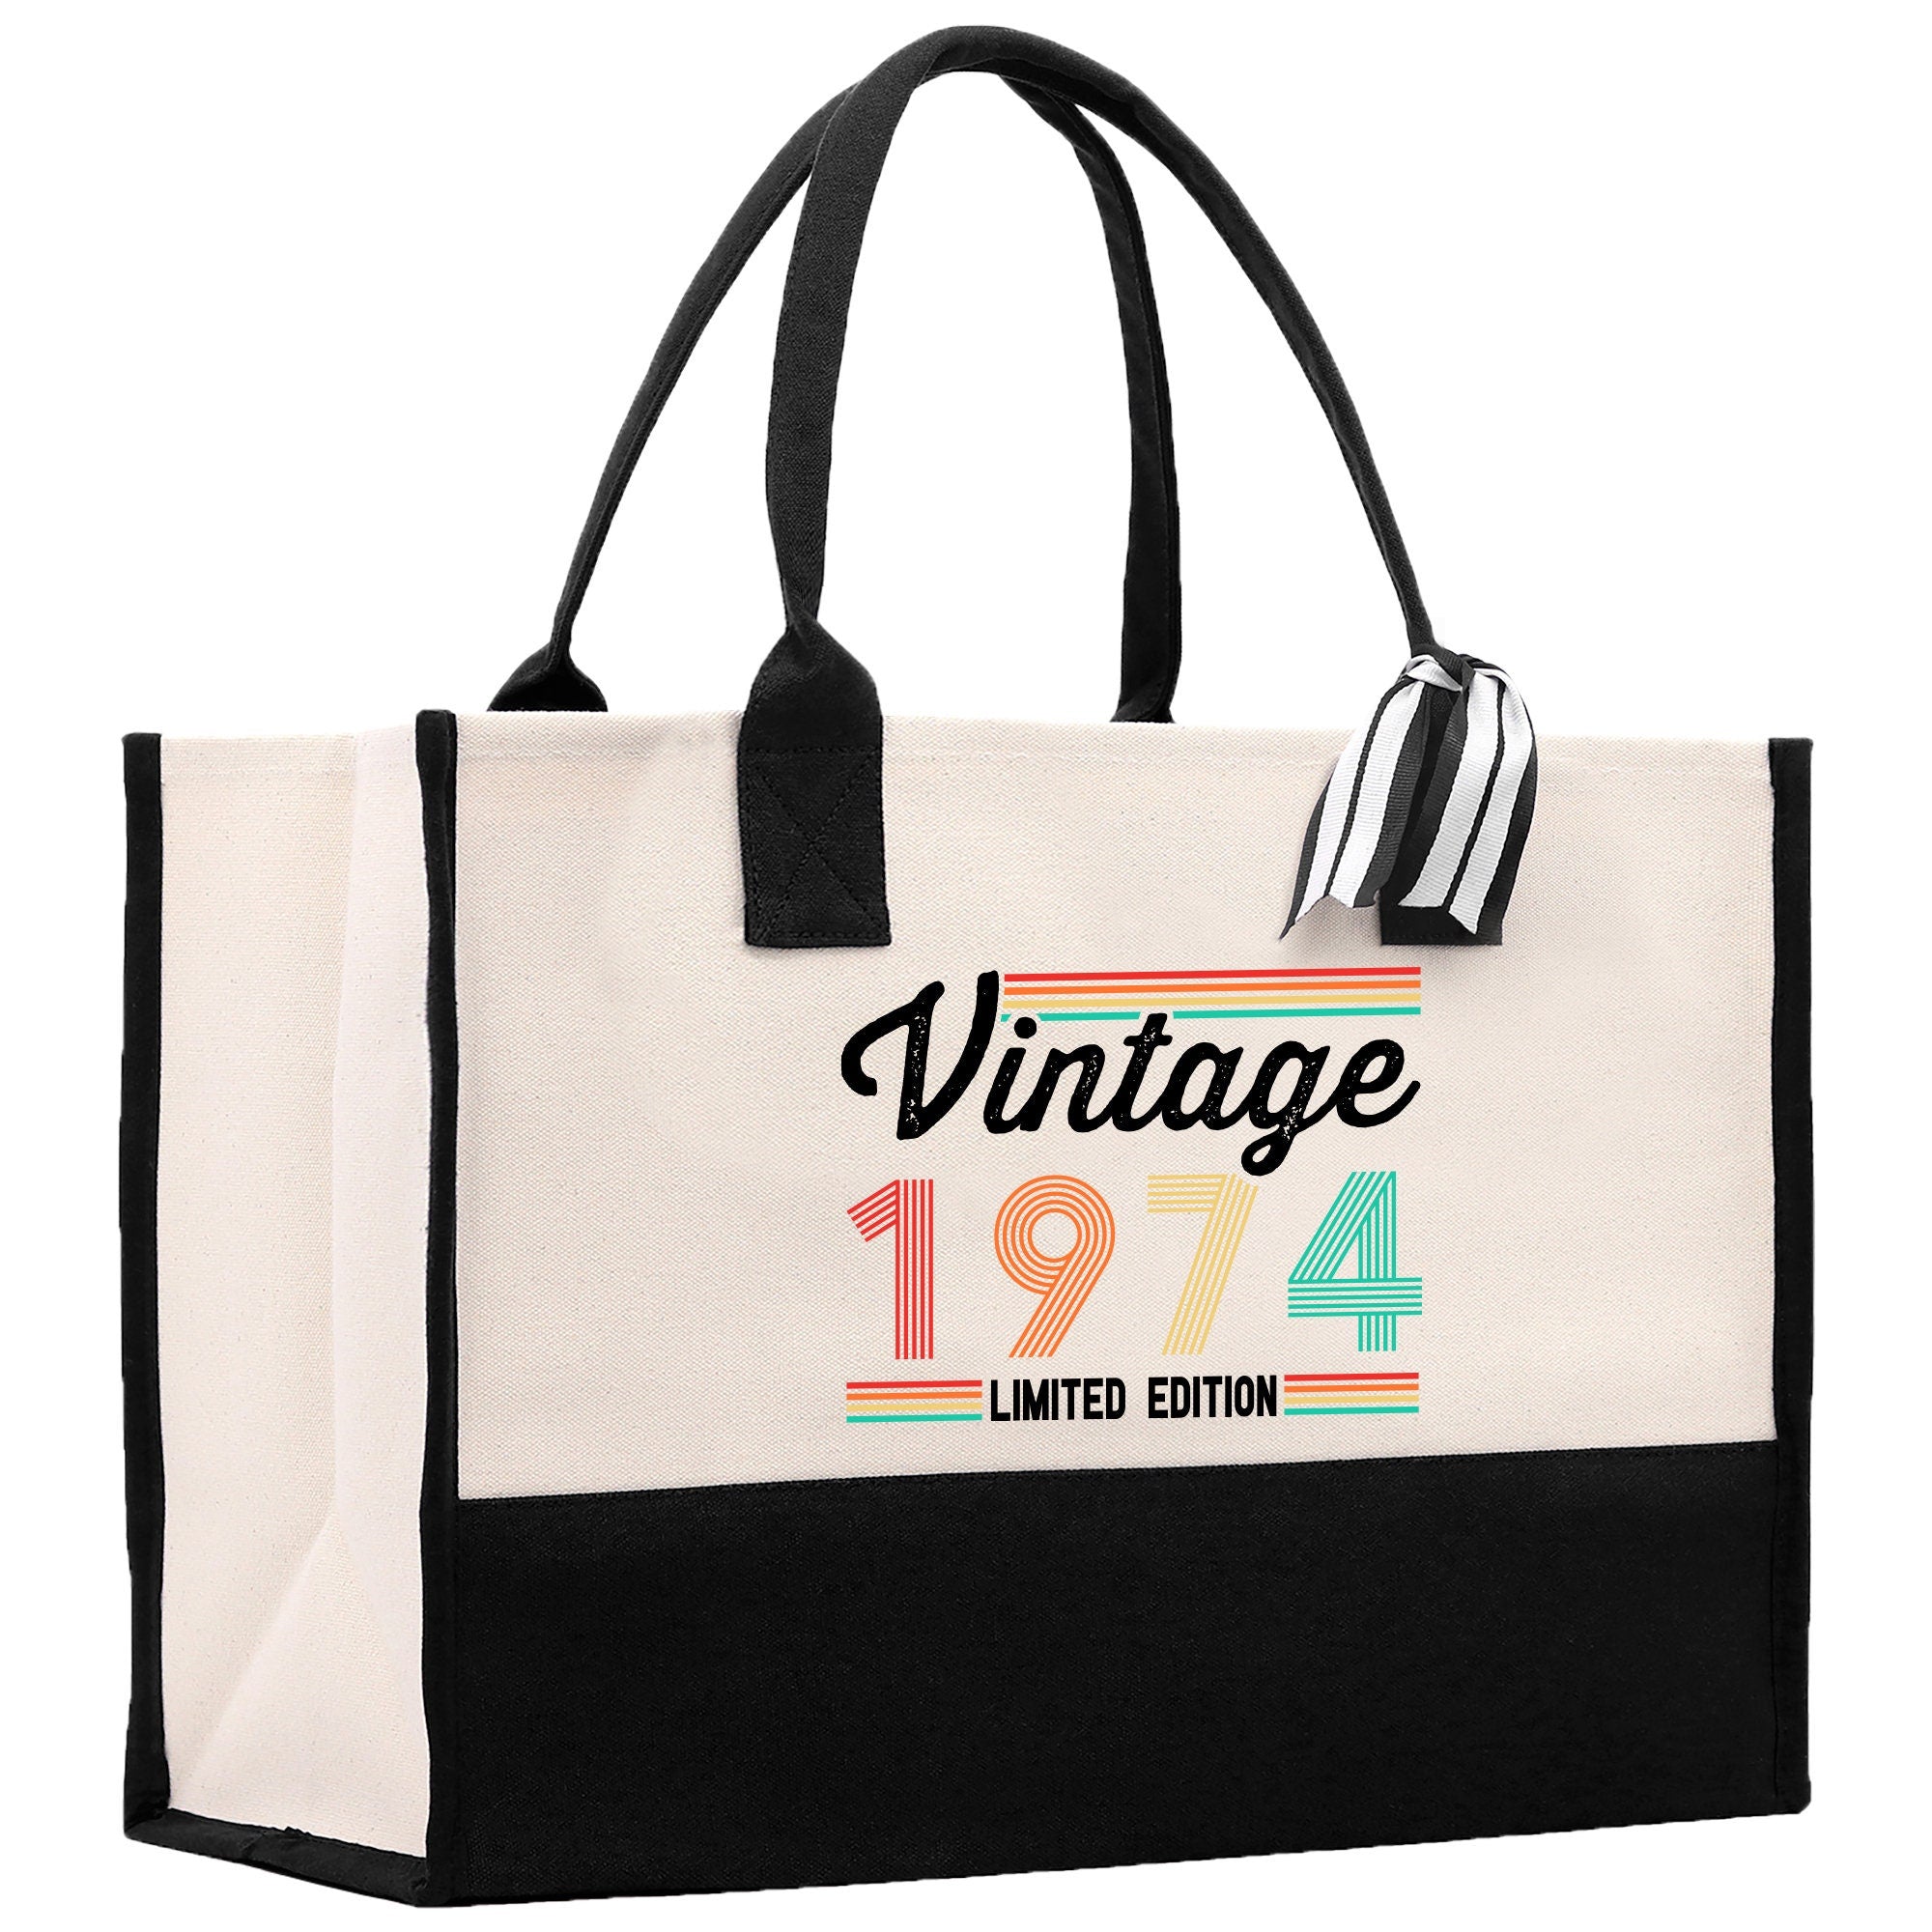 a black and white bag with a vintage 1971 printed on it